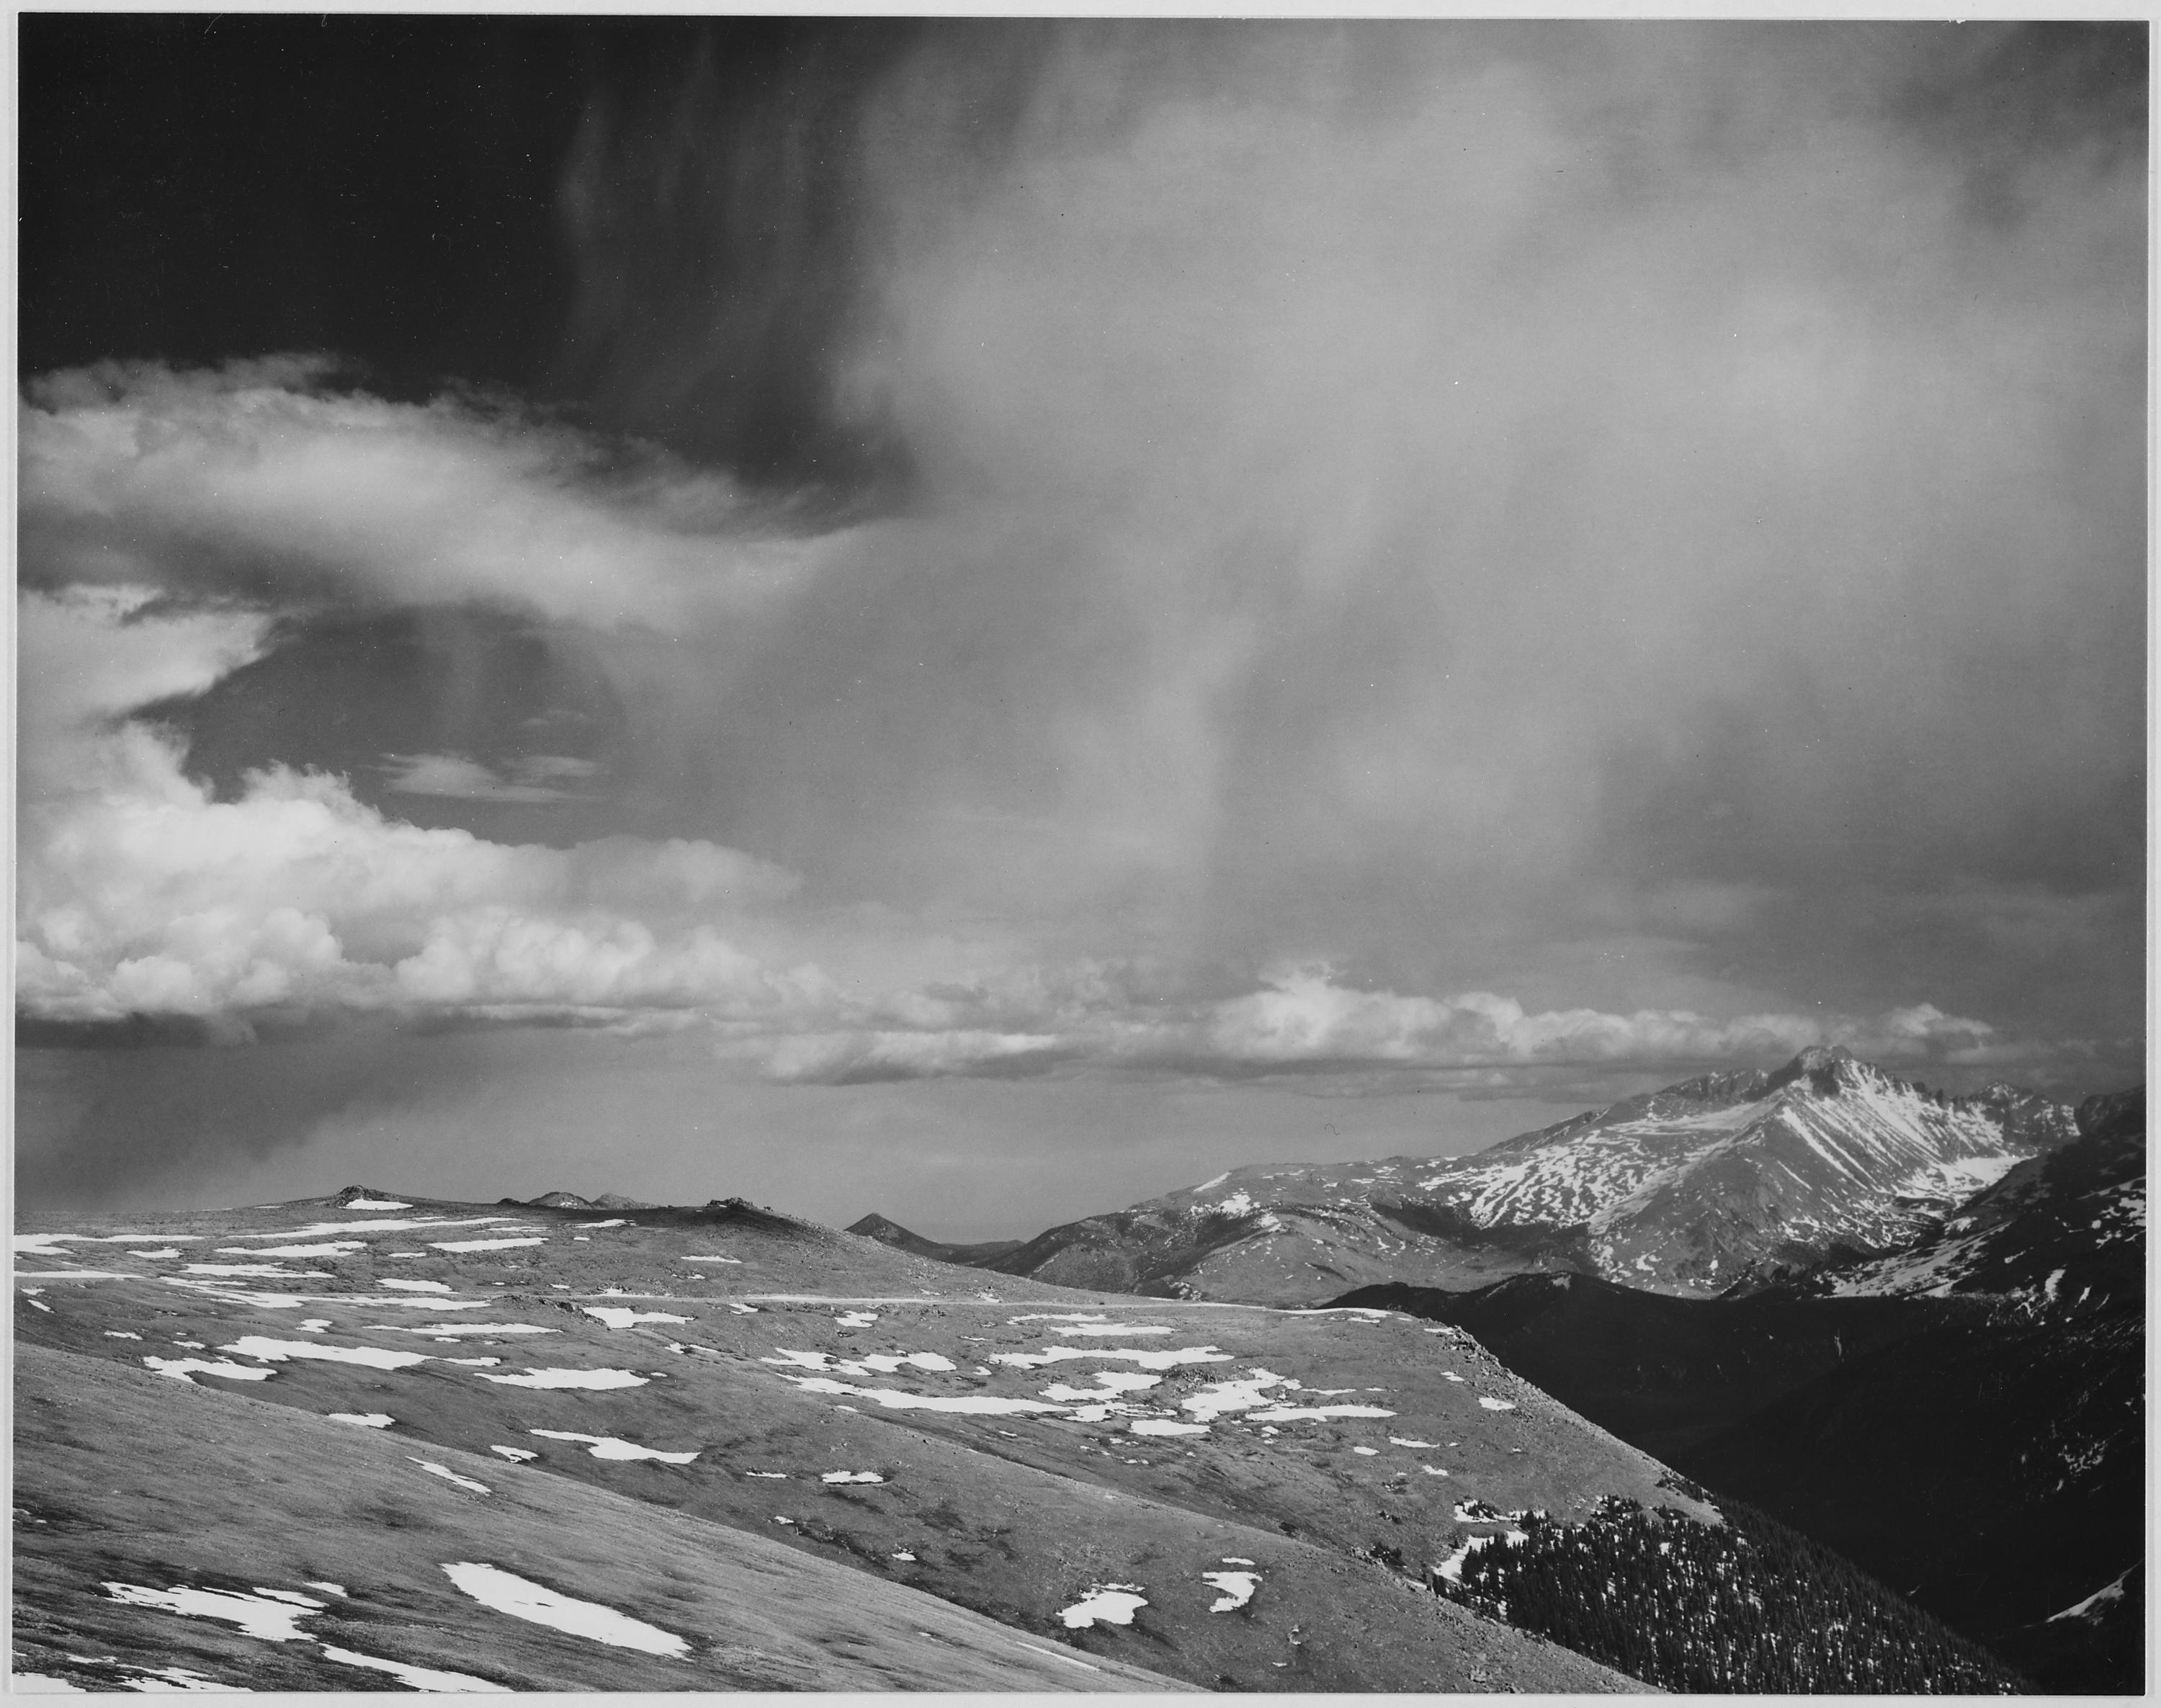 Ansel Adams - National Archives 79-AA-M12